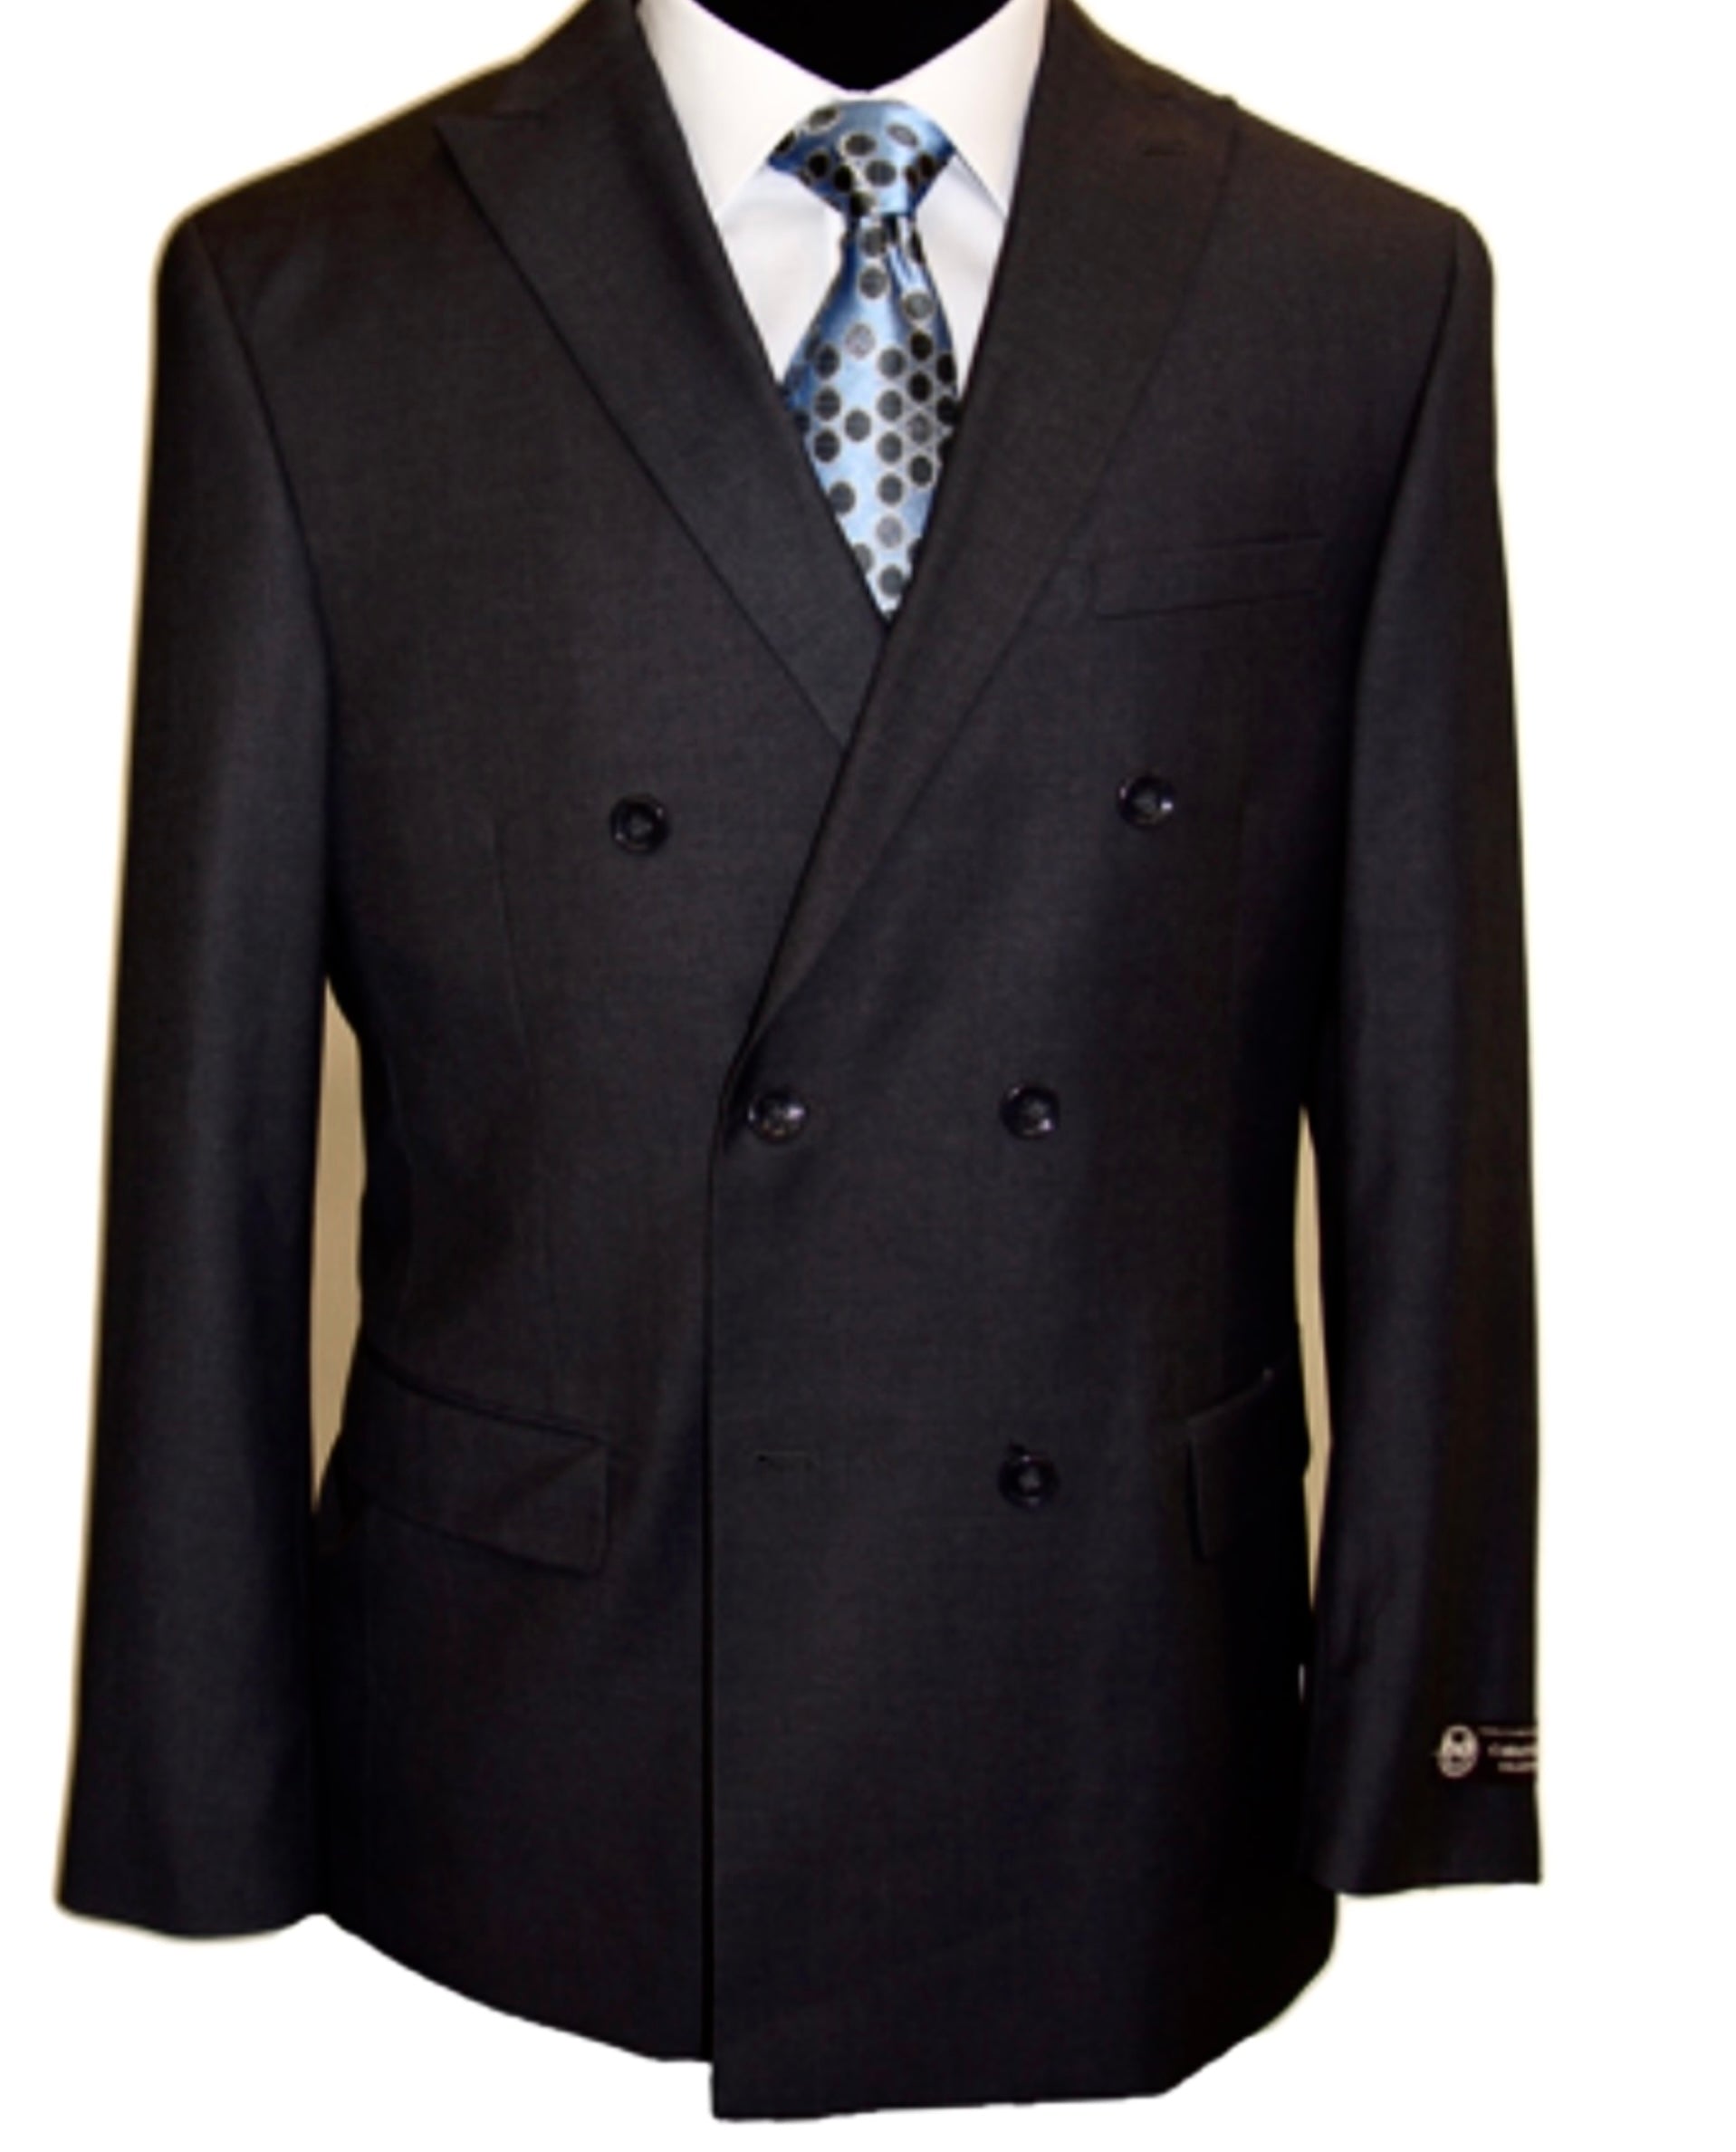 R P SUIT / DOUBLE BREASTED / CLASSIC FIT / BLACK & GREY / MICROFIBER / 36 TO 54 / REG / LONG / SHORT